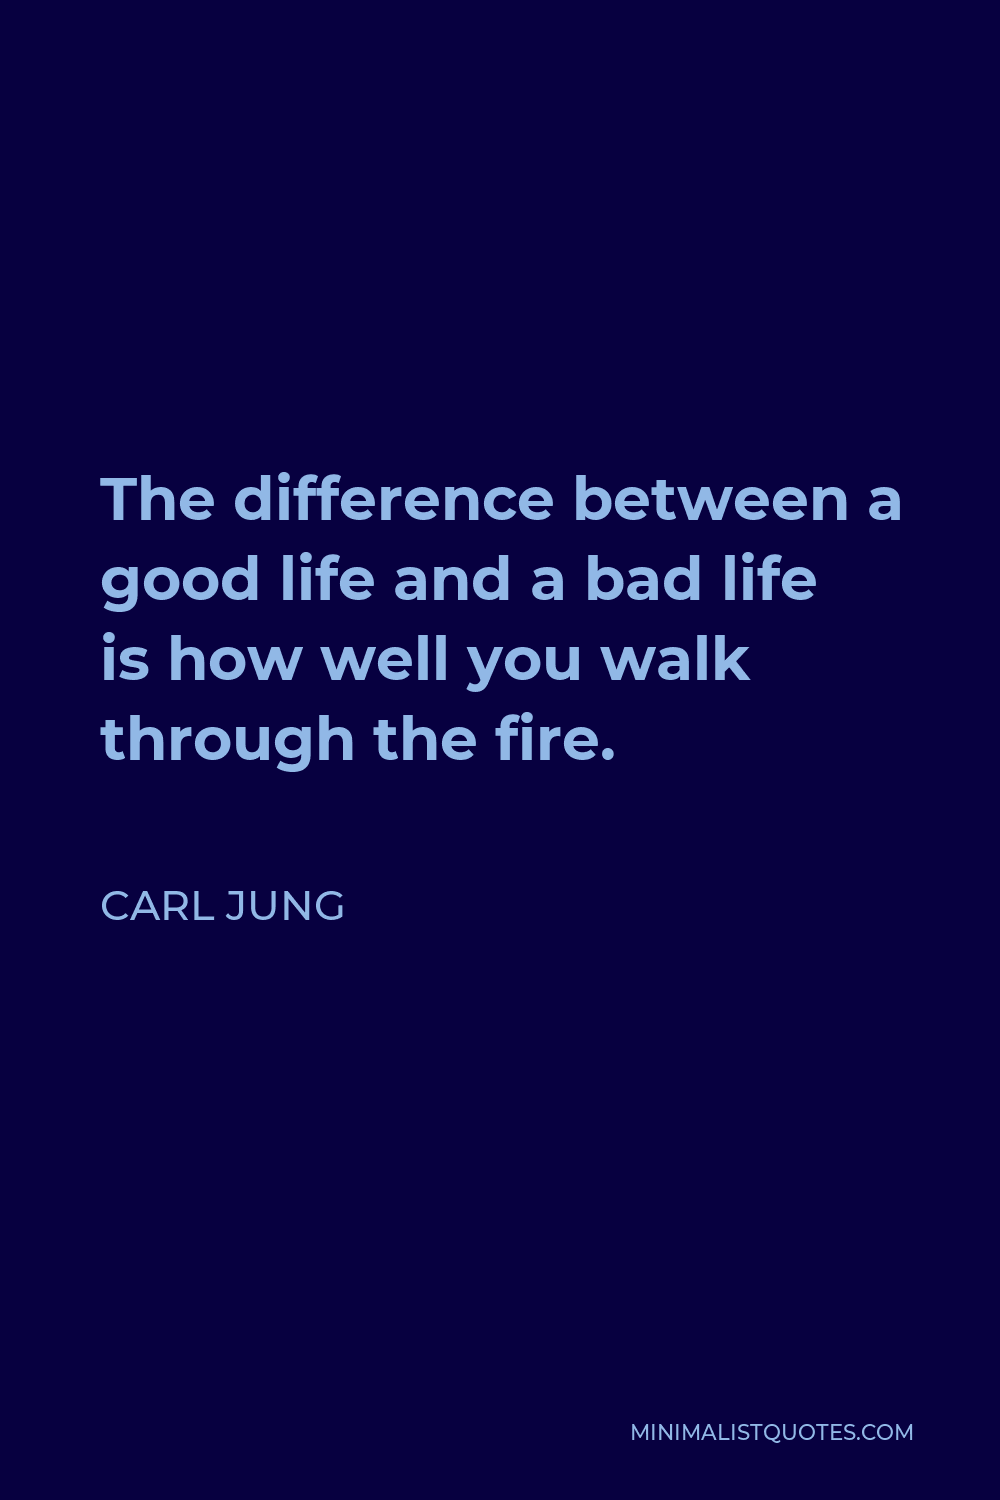 Carl Jung Quote - The difference between a good life and a bad life is how well you walk through the fire.